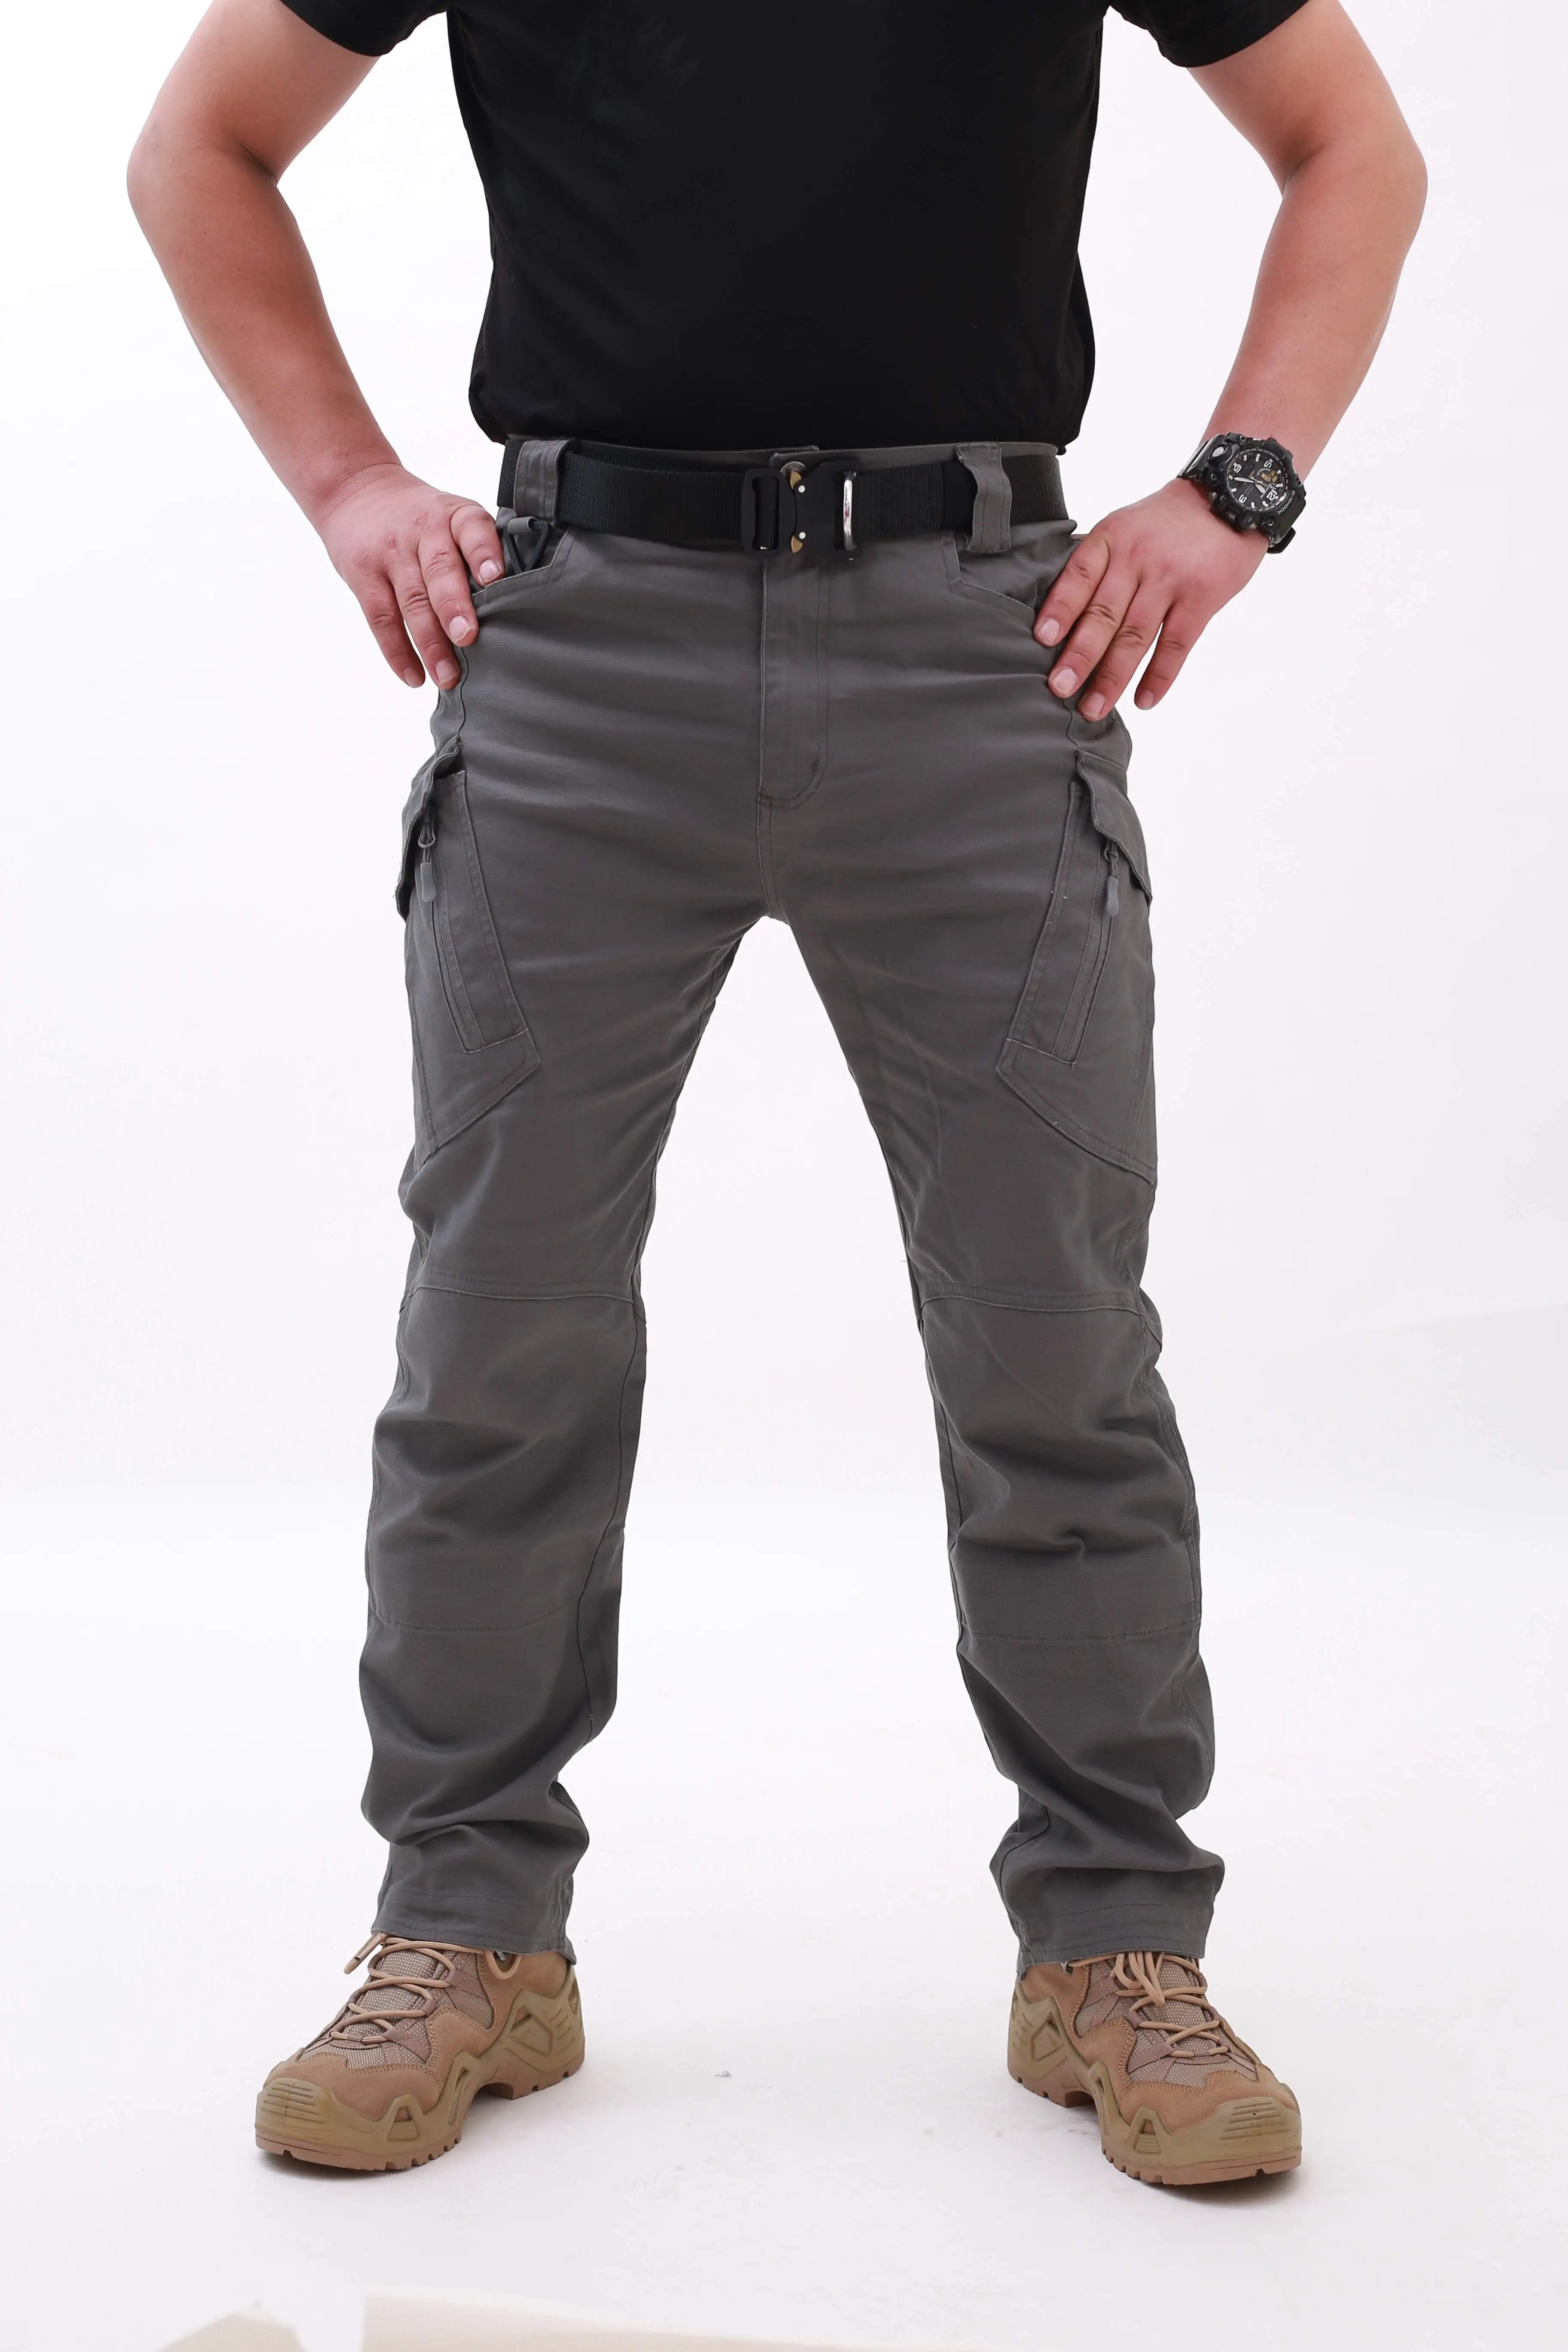 Navy Cargo Pants Men's Trousers Outdoor Techwear Hiking Pantalons Cargo  Pants - China Cargo Pants and Work Trousers price